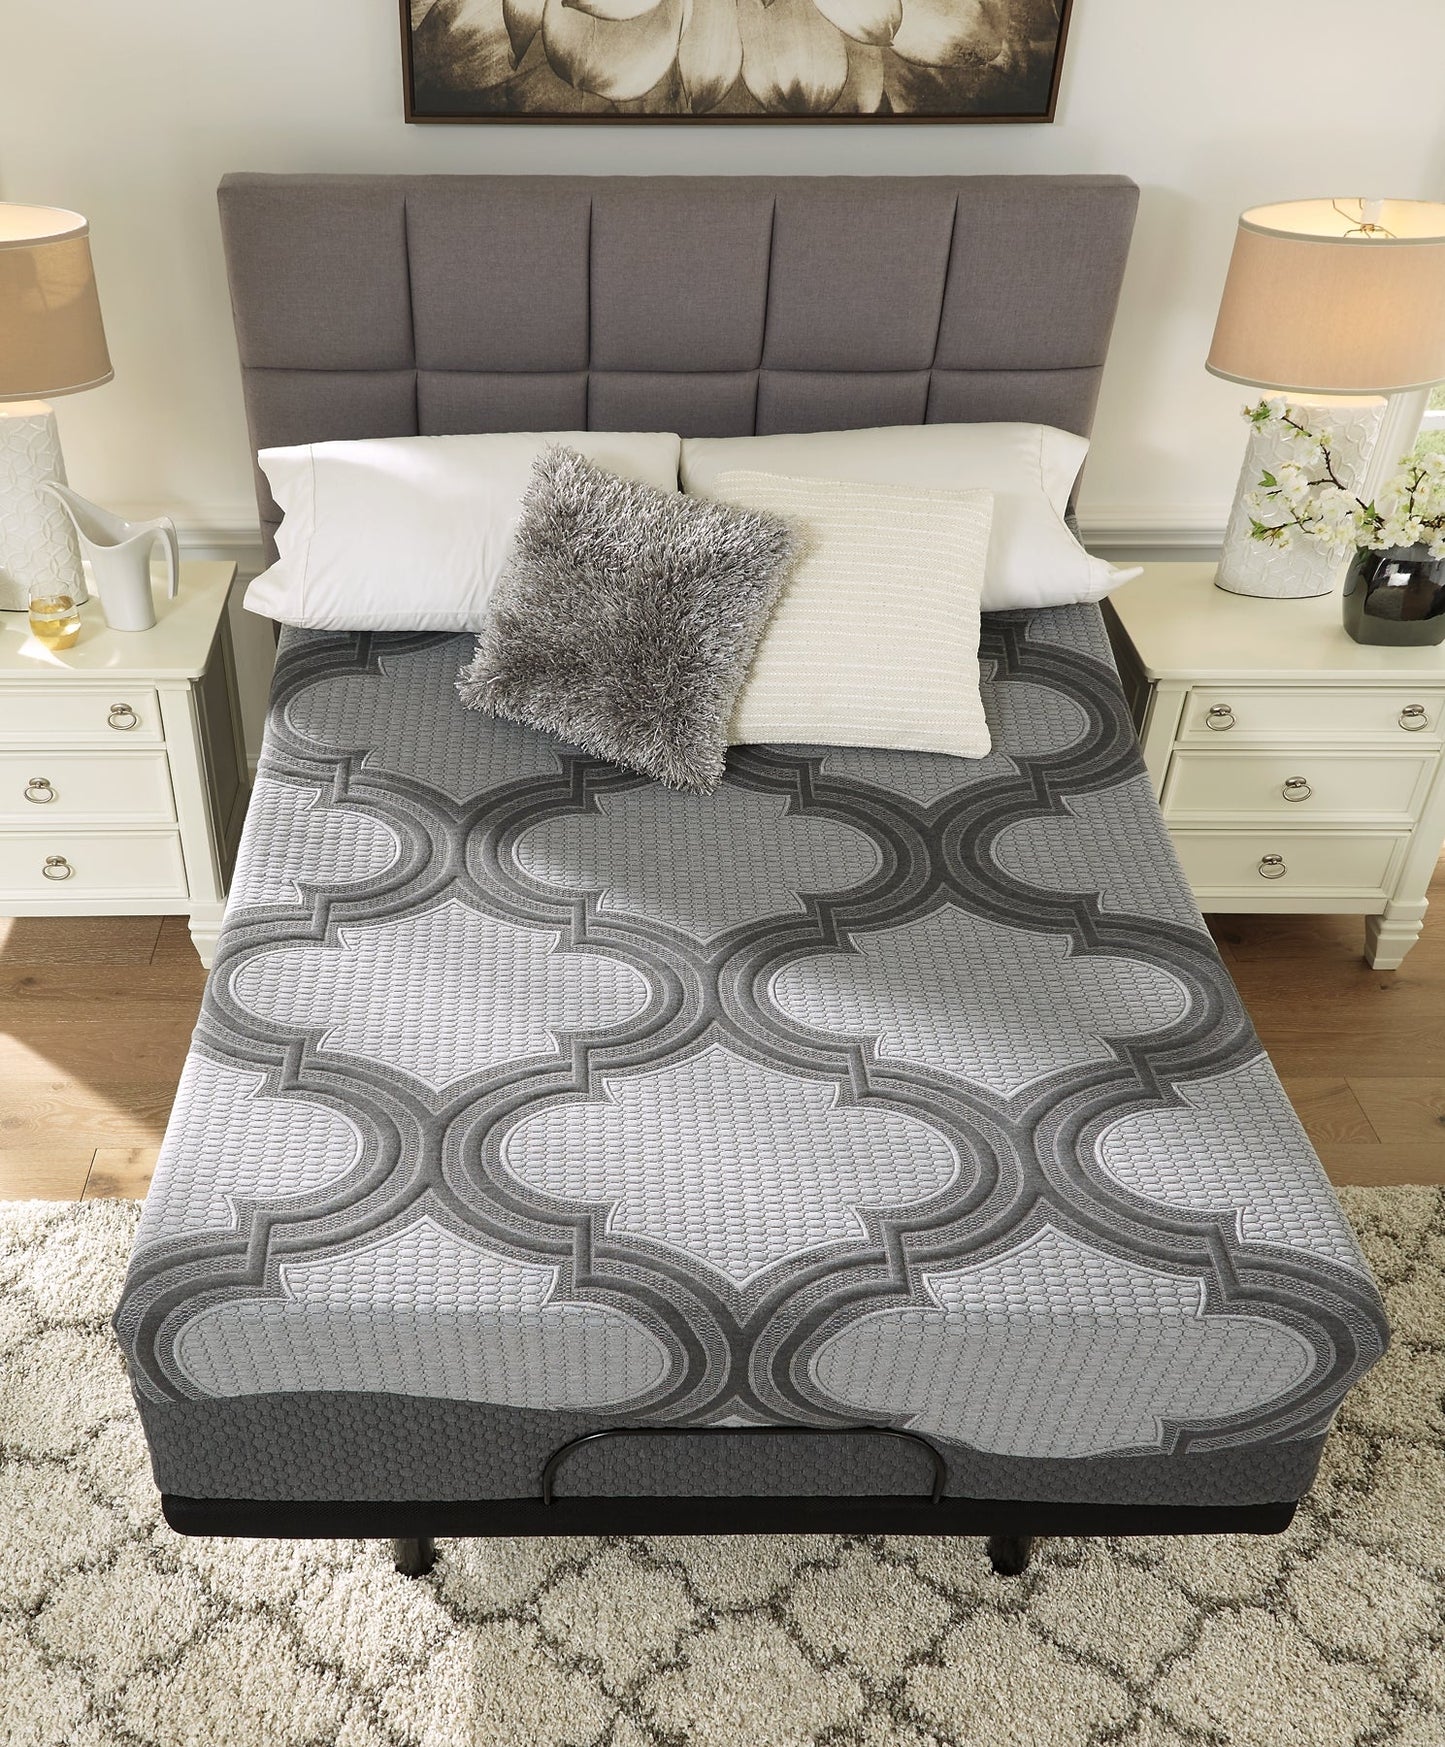 14 Inch Ashley Hybrid Mattress with Adjustable Base Rent Wise Rent To Own Jacksonville, Florida